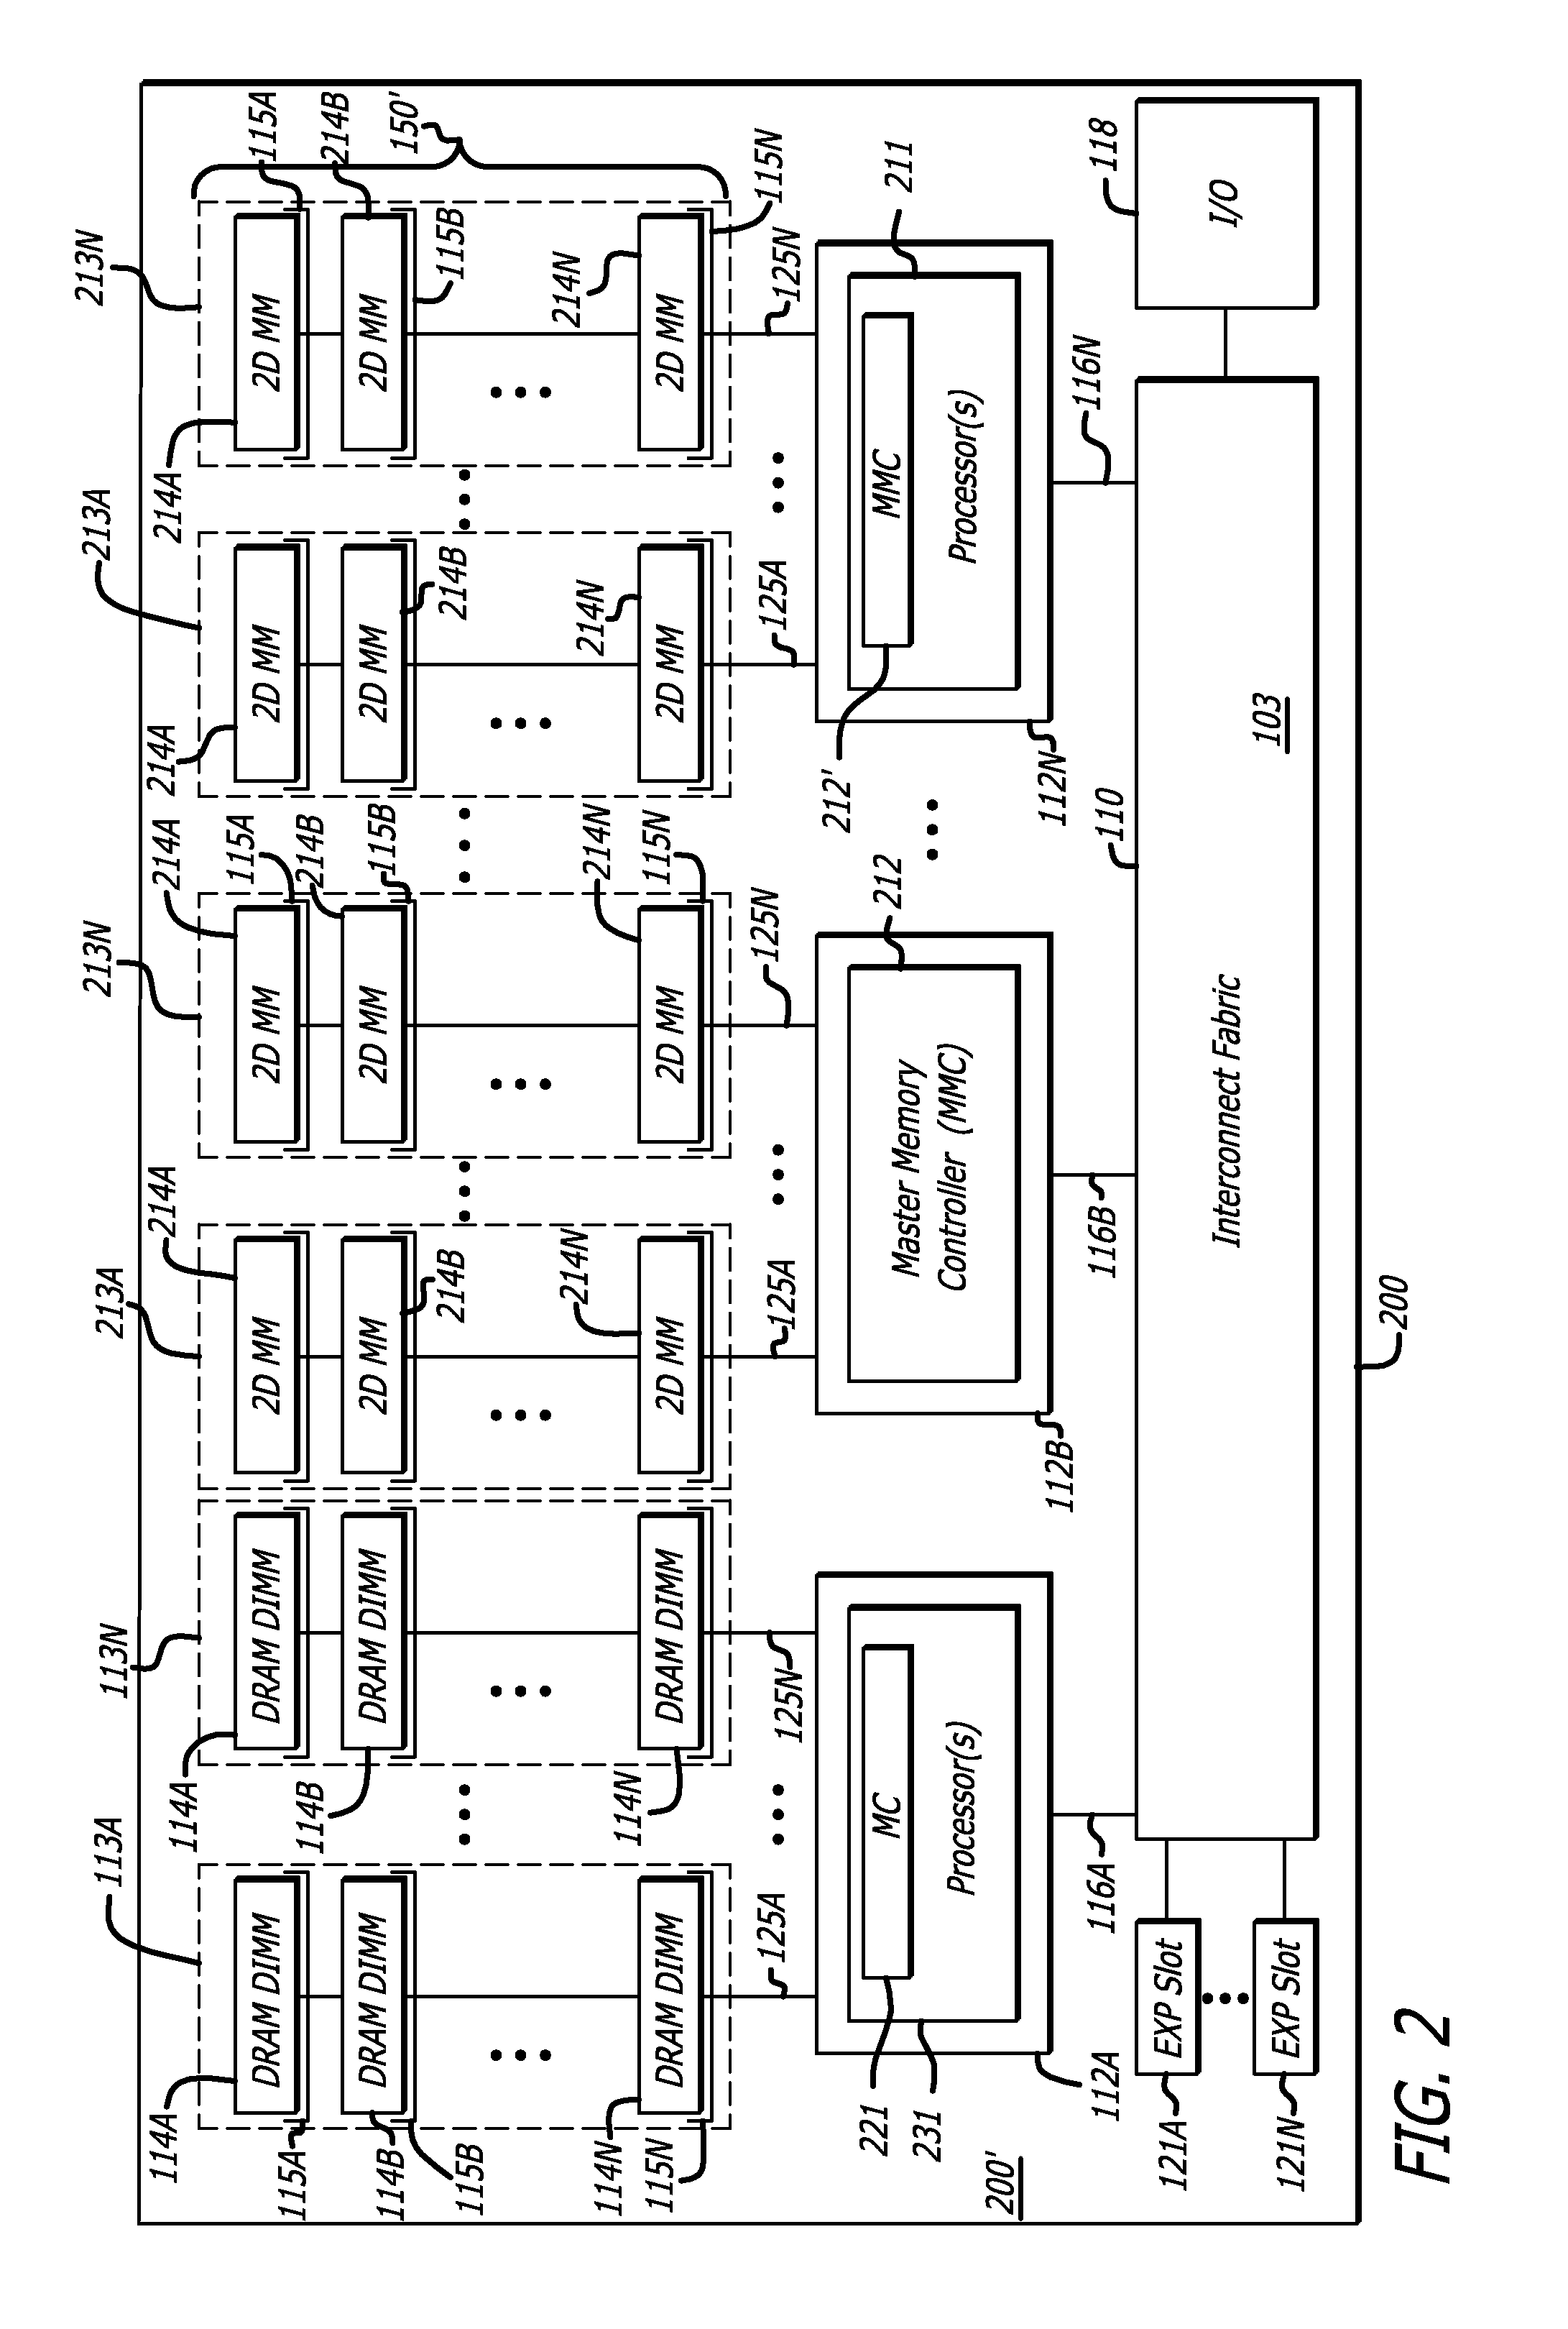 Methods and apparatus for two-dimensional main memory